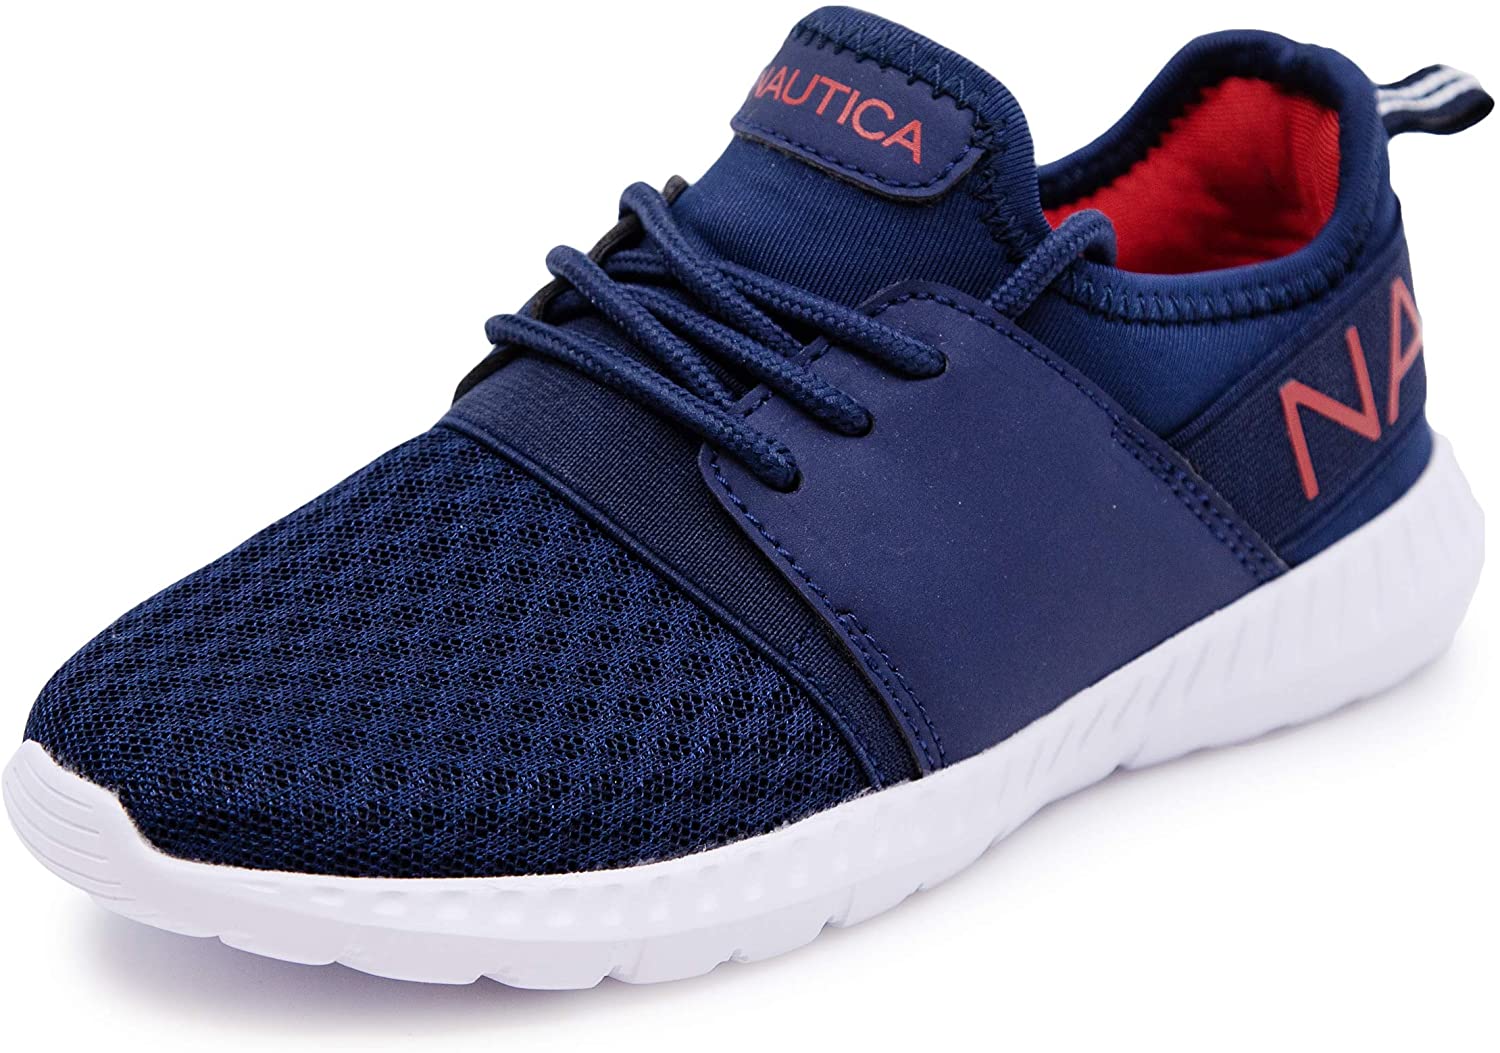 Nautica Kids Youth Sneaker Comfortable Athletic Running Shoes|Boys-Girls|-Kaiden/Kappil 